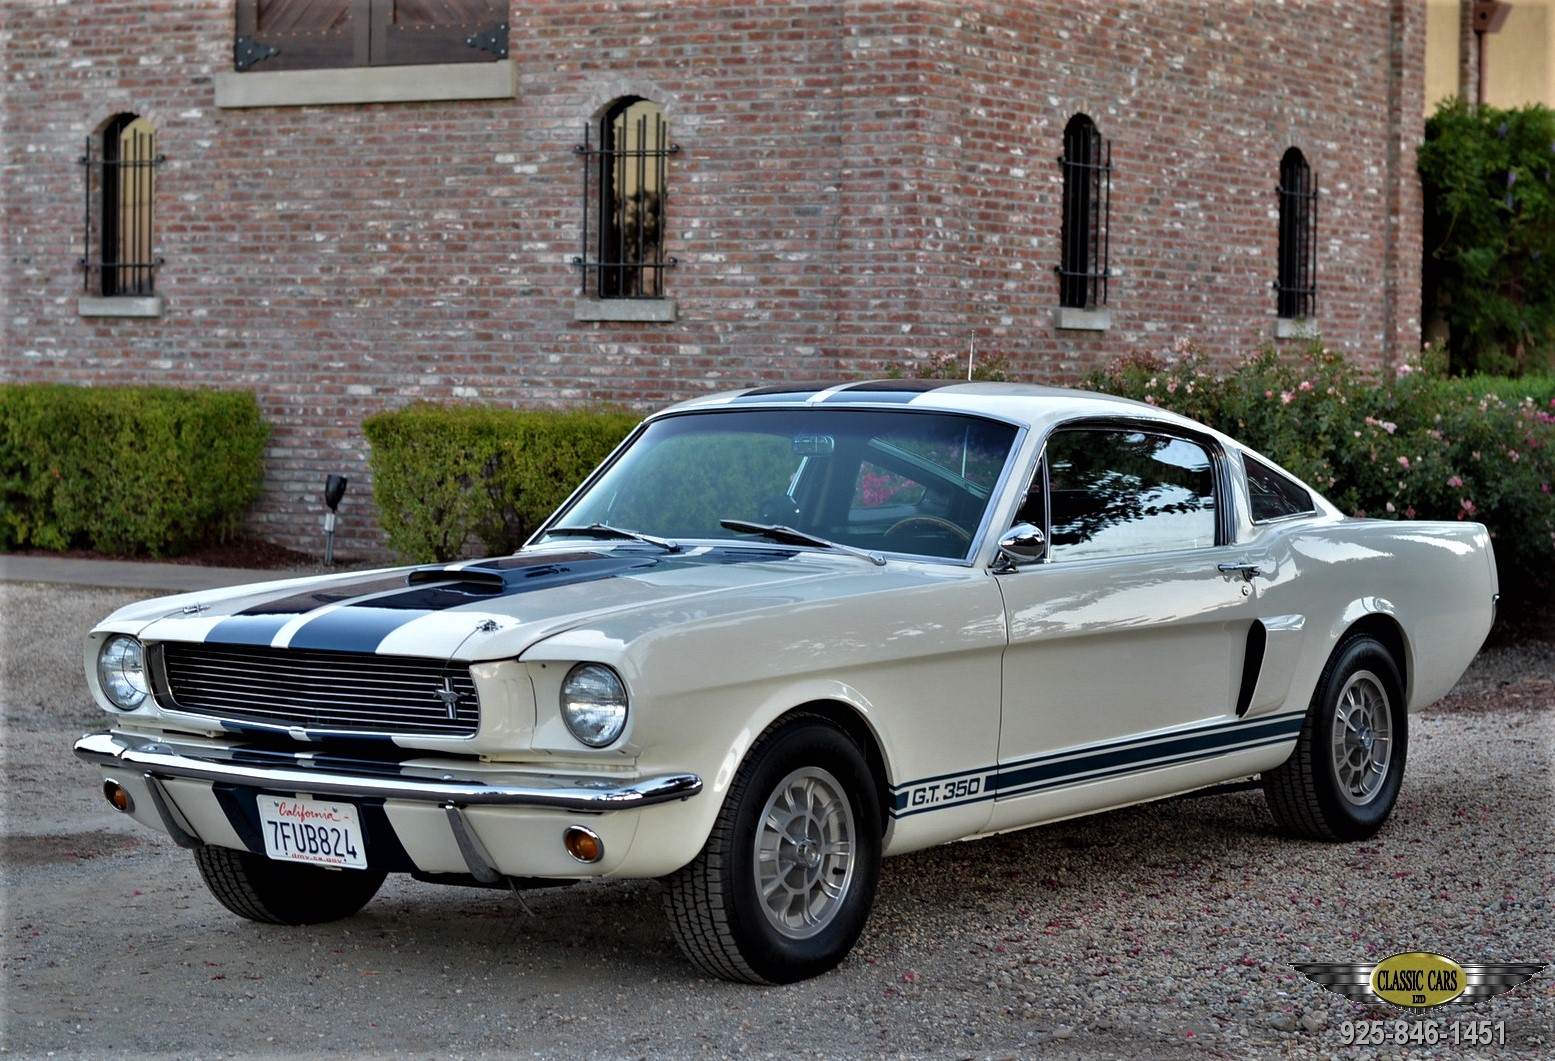 White Shelby G.T. 350 classic car